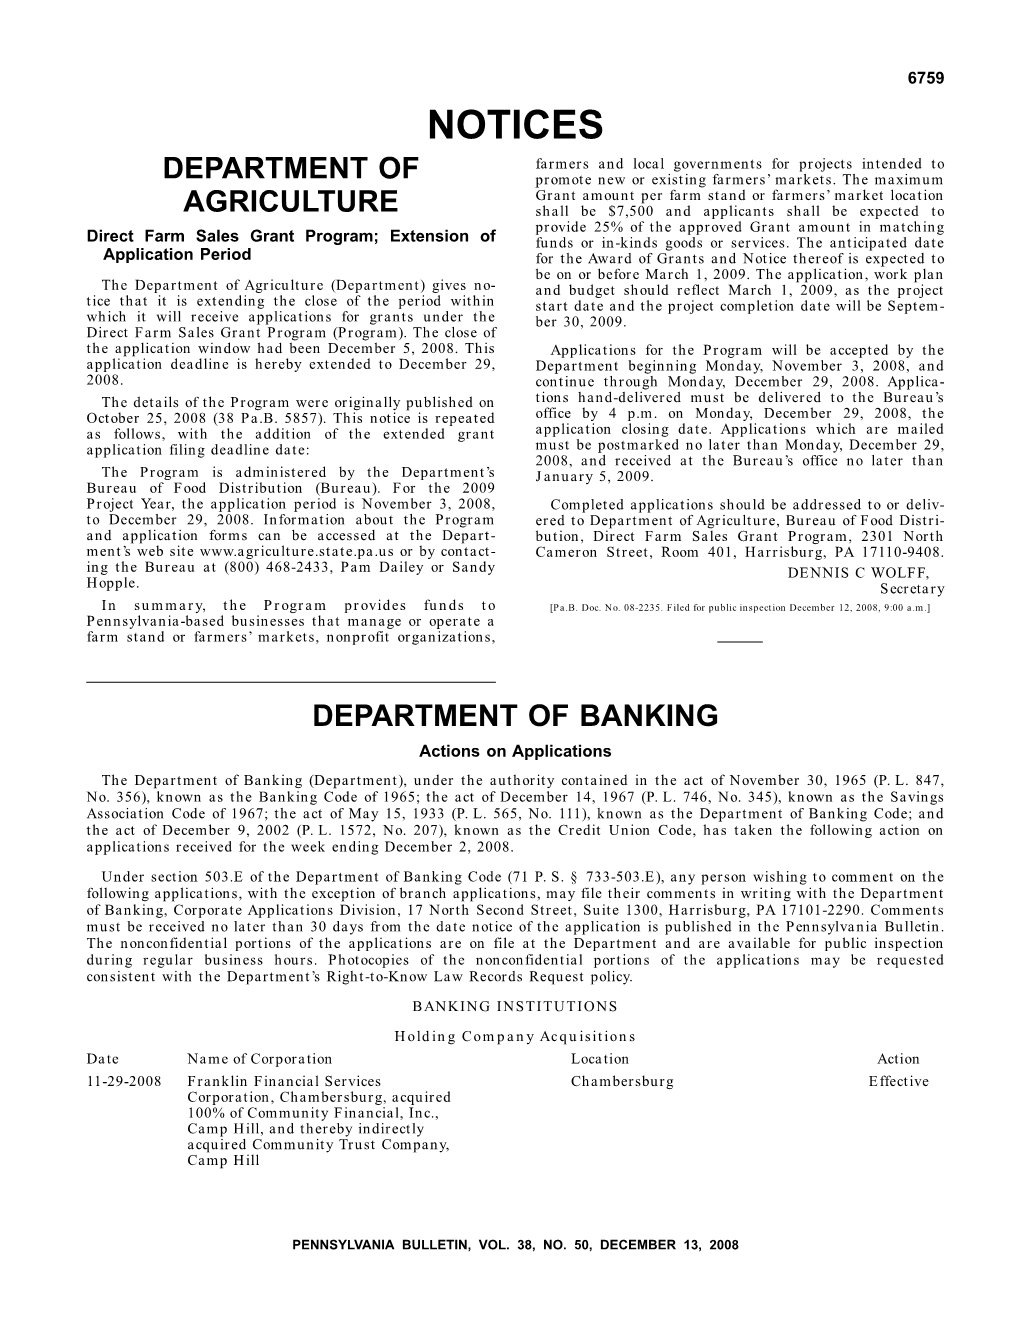 NOTICES Farmers and Local Governments for Projects Intended to DEPARTMENT of Promote New Or Existing Farmers’ Markets